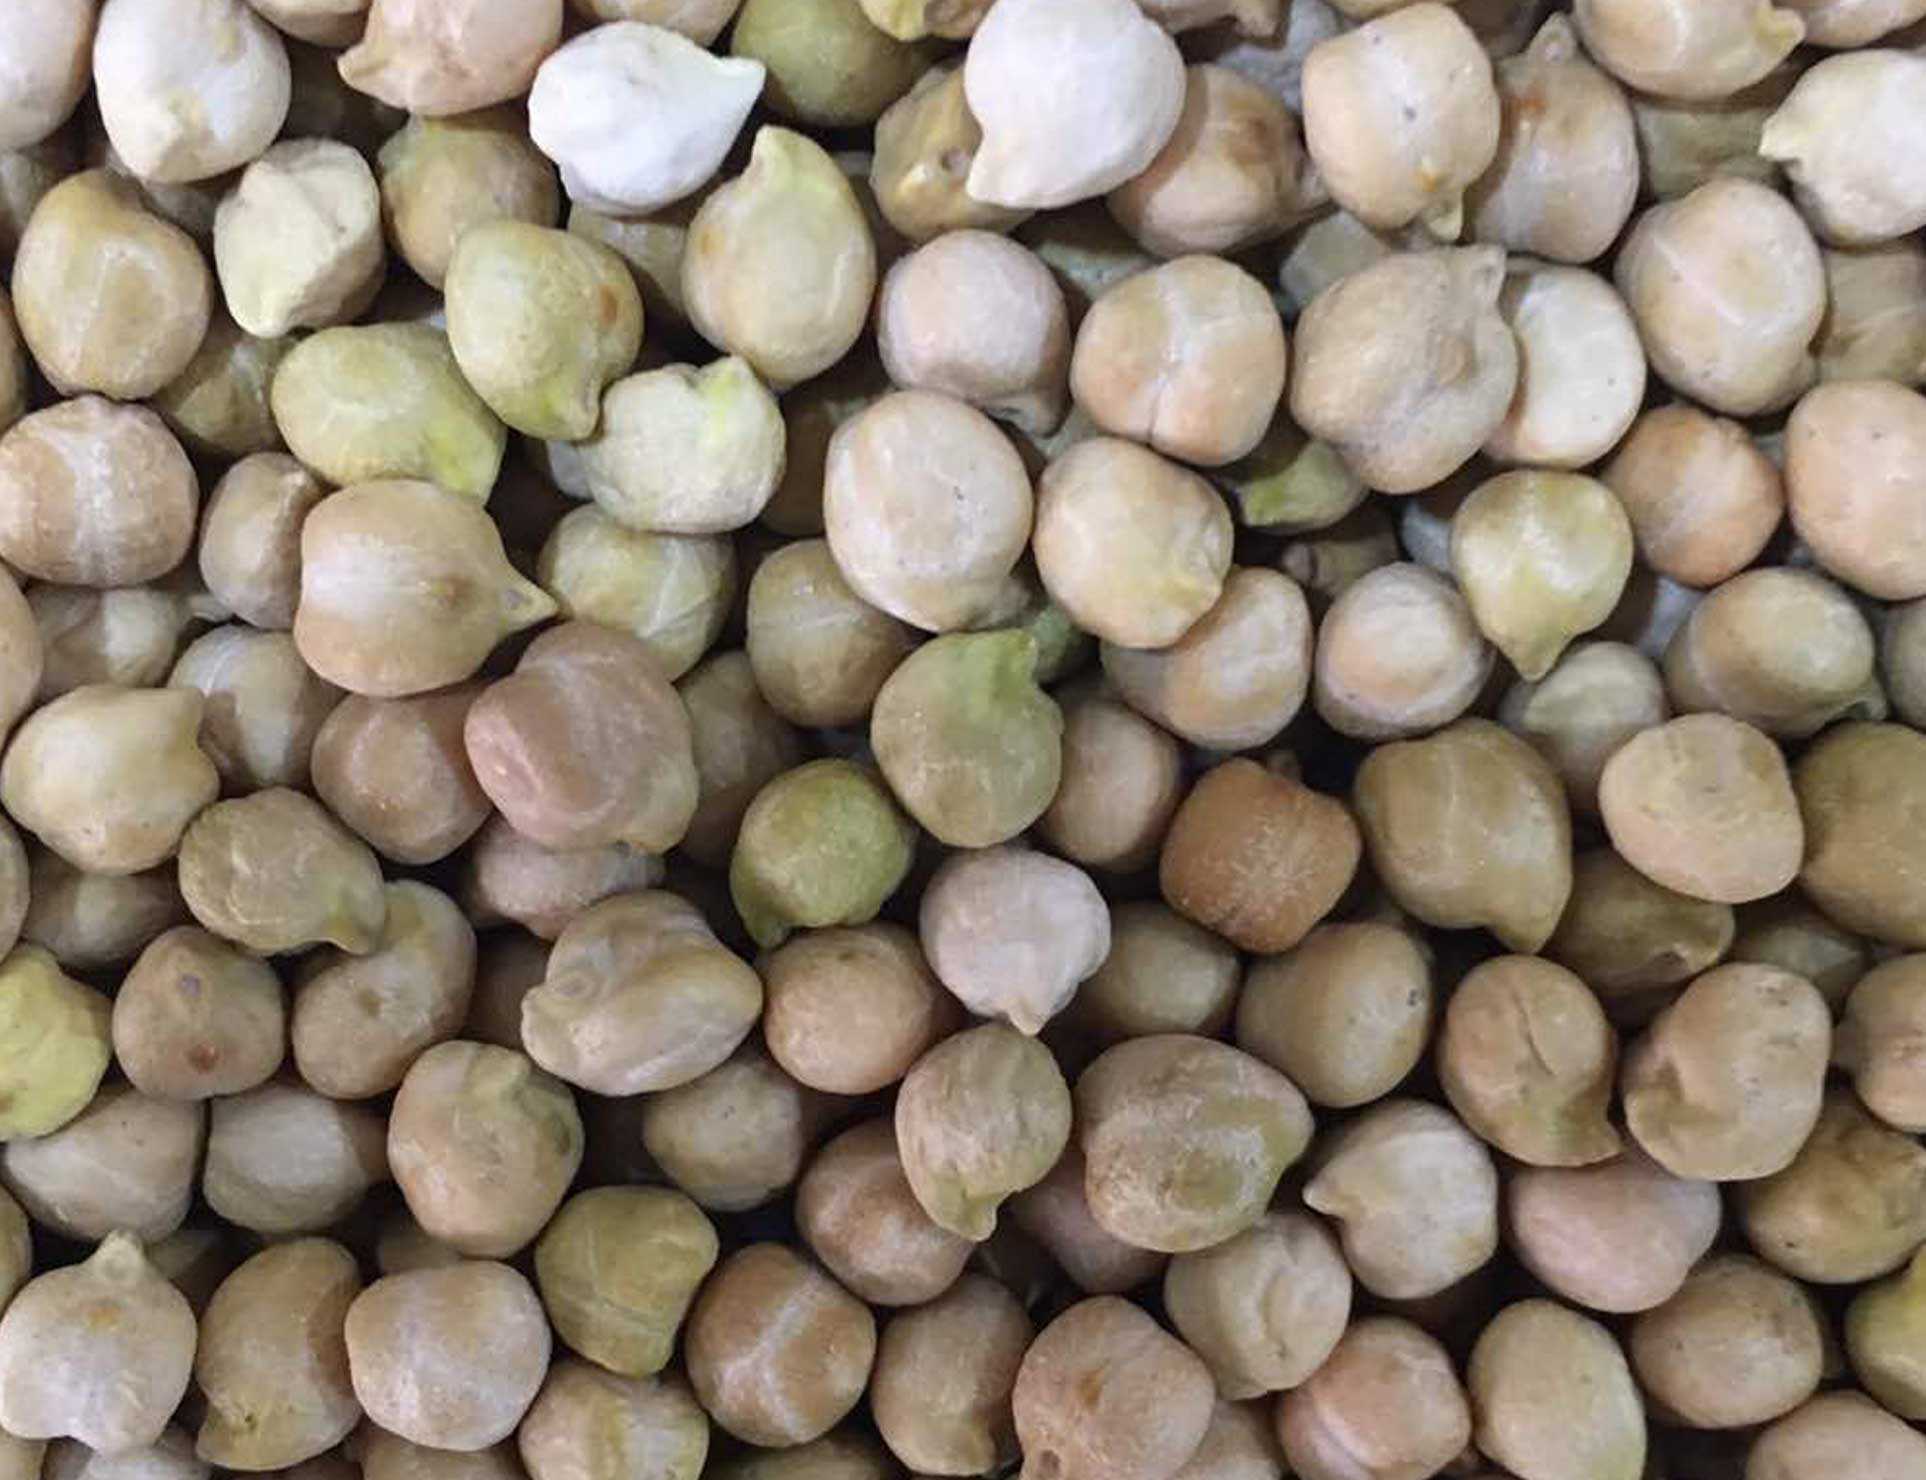 chick pea, Chickpeas, Chickpeas seed, hummus beans, hommos beans